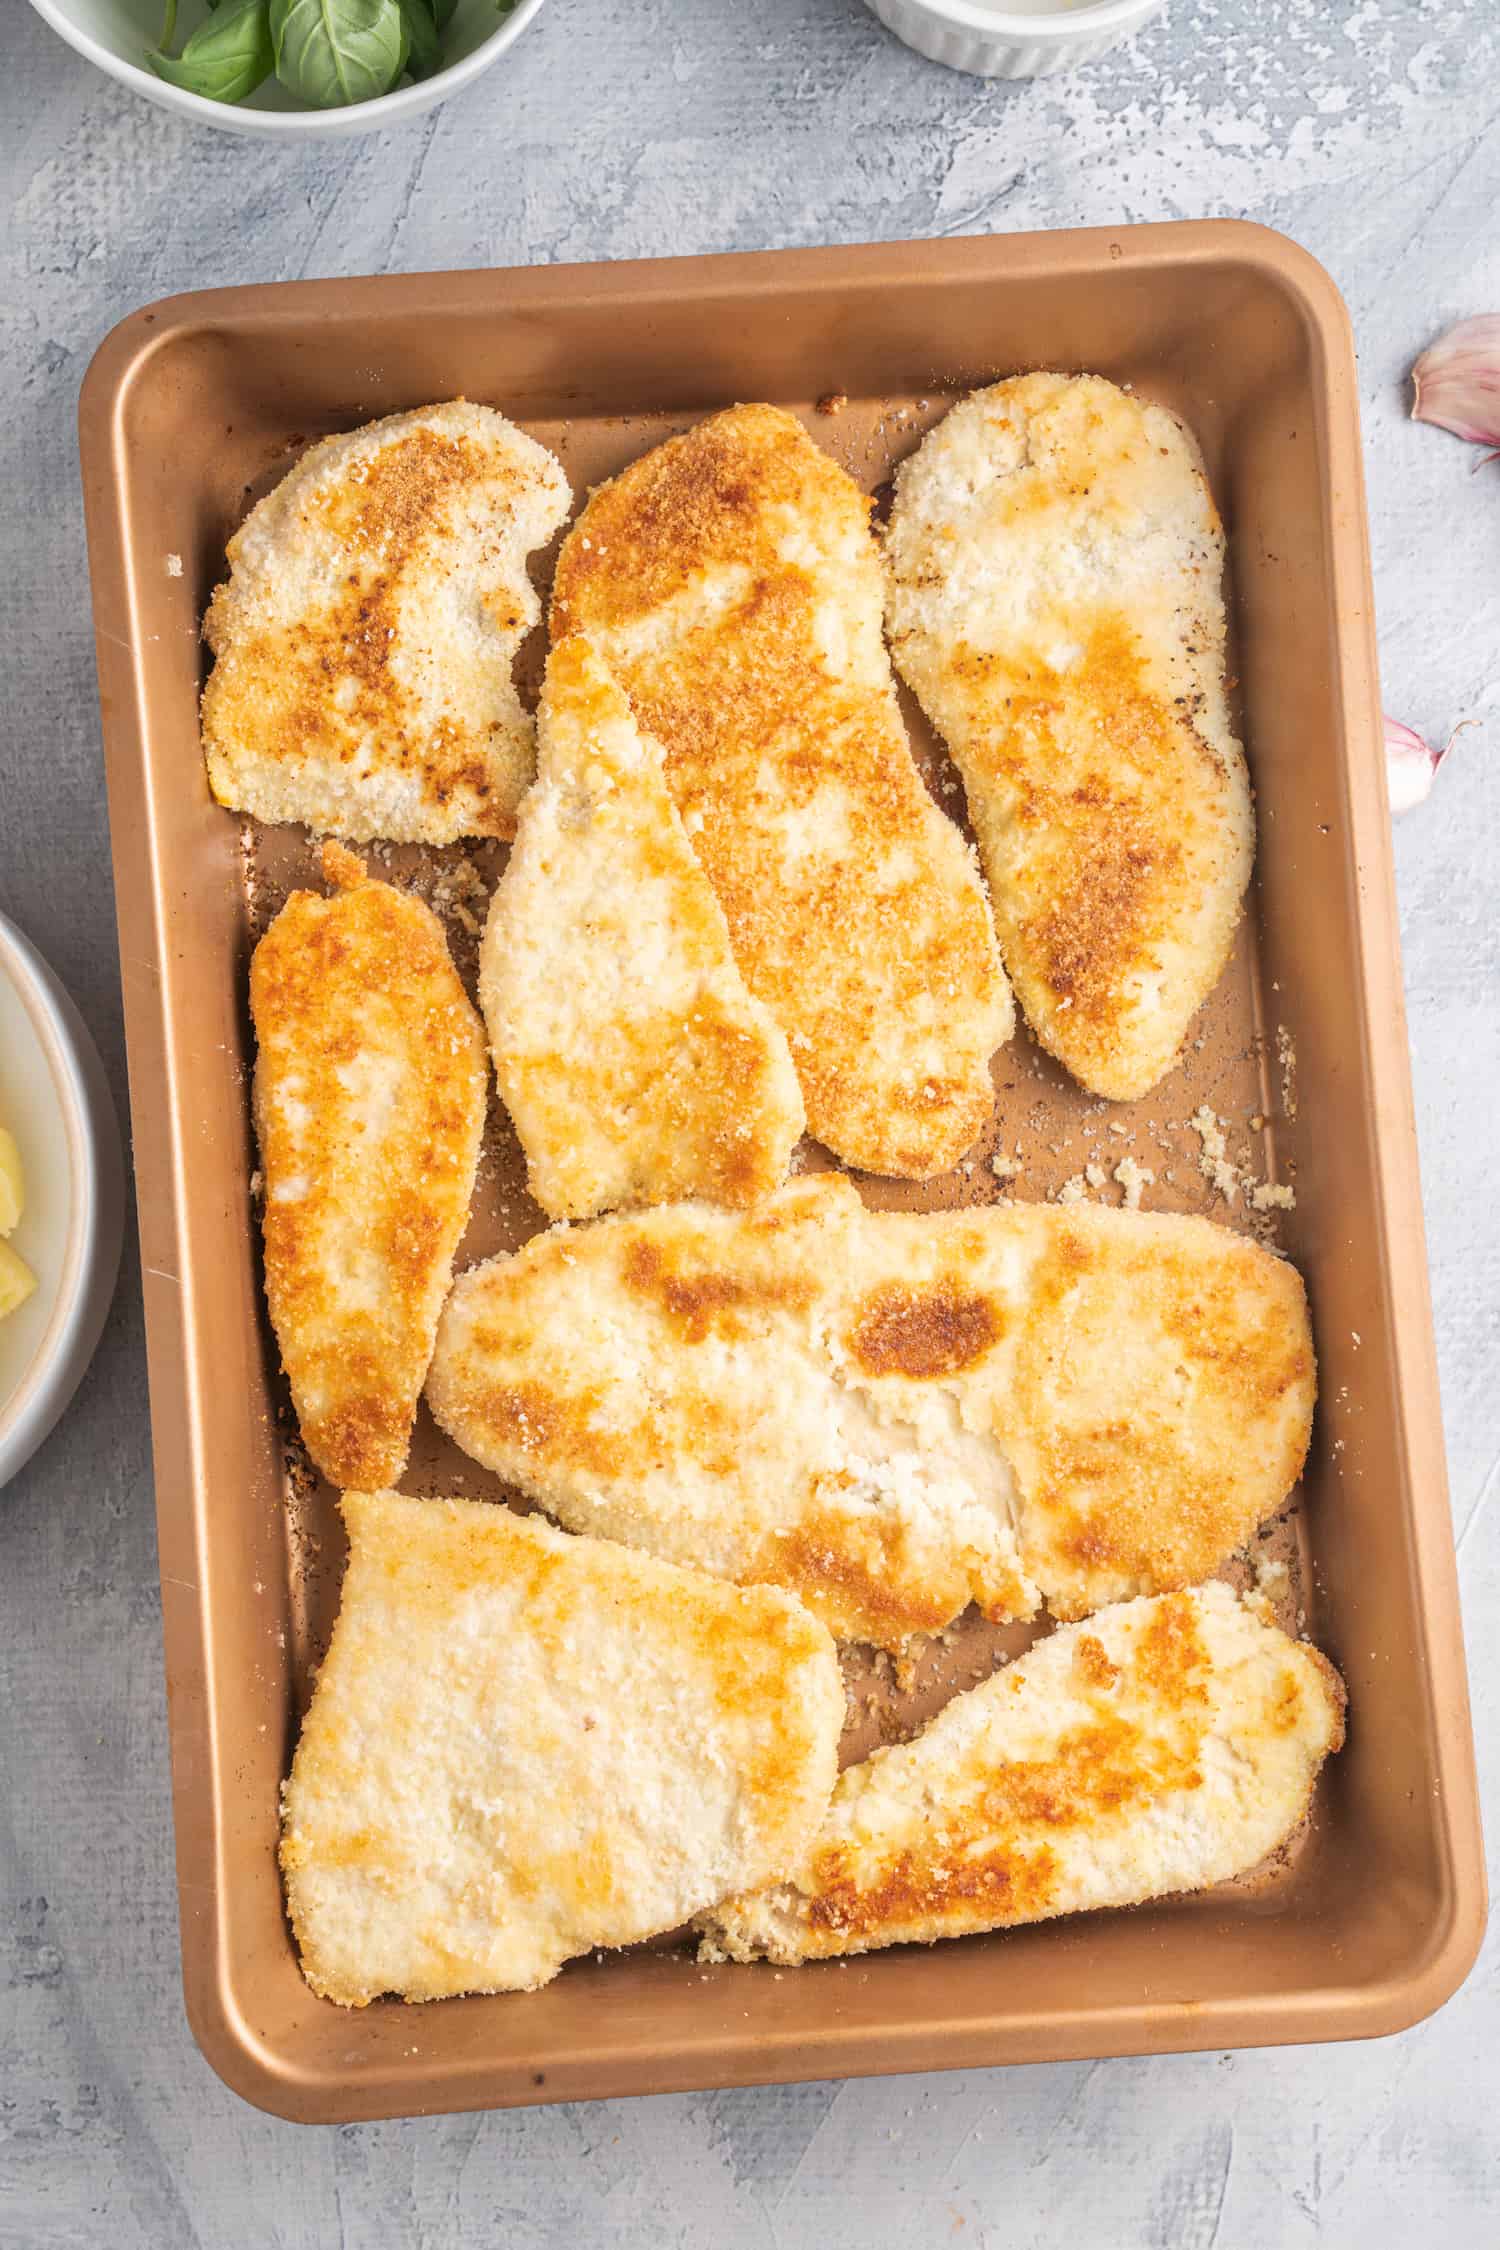 Baked chicken cutlets on a baking tray.